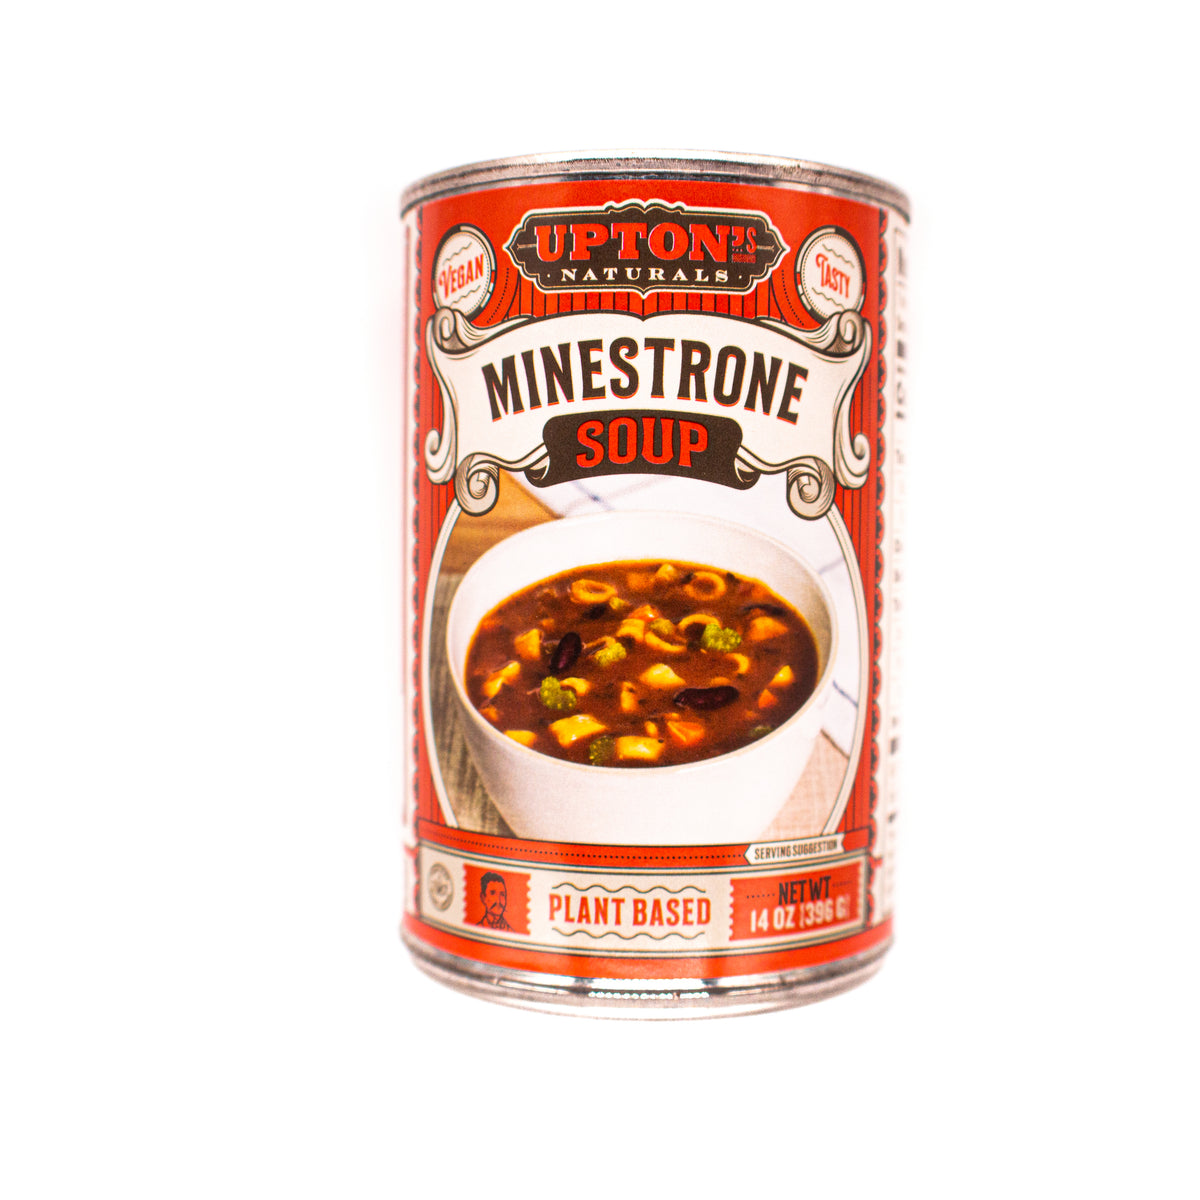 Uptons Naturals Soup Minestrone